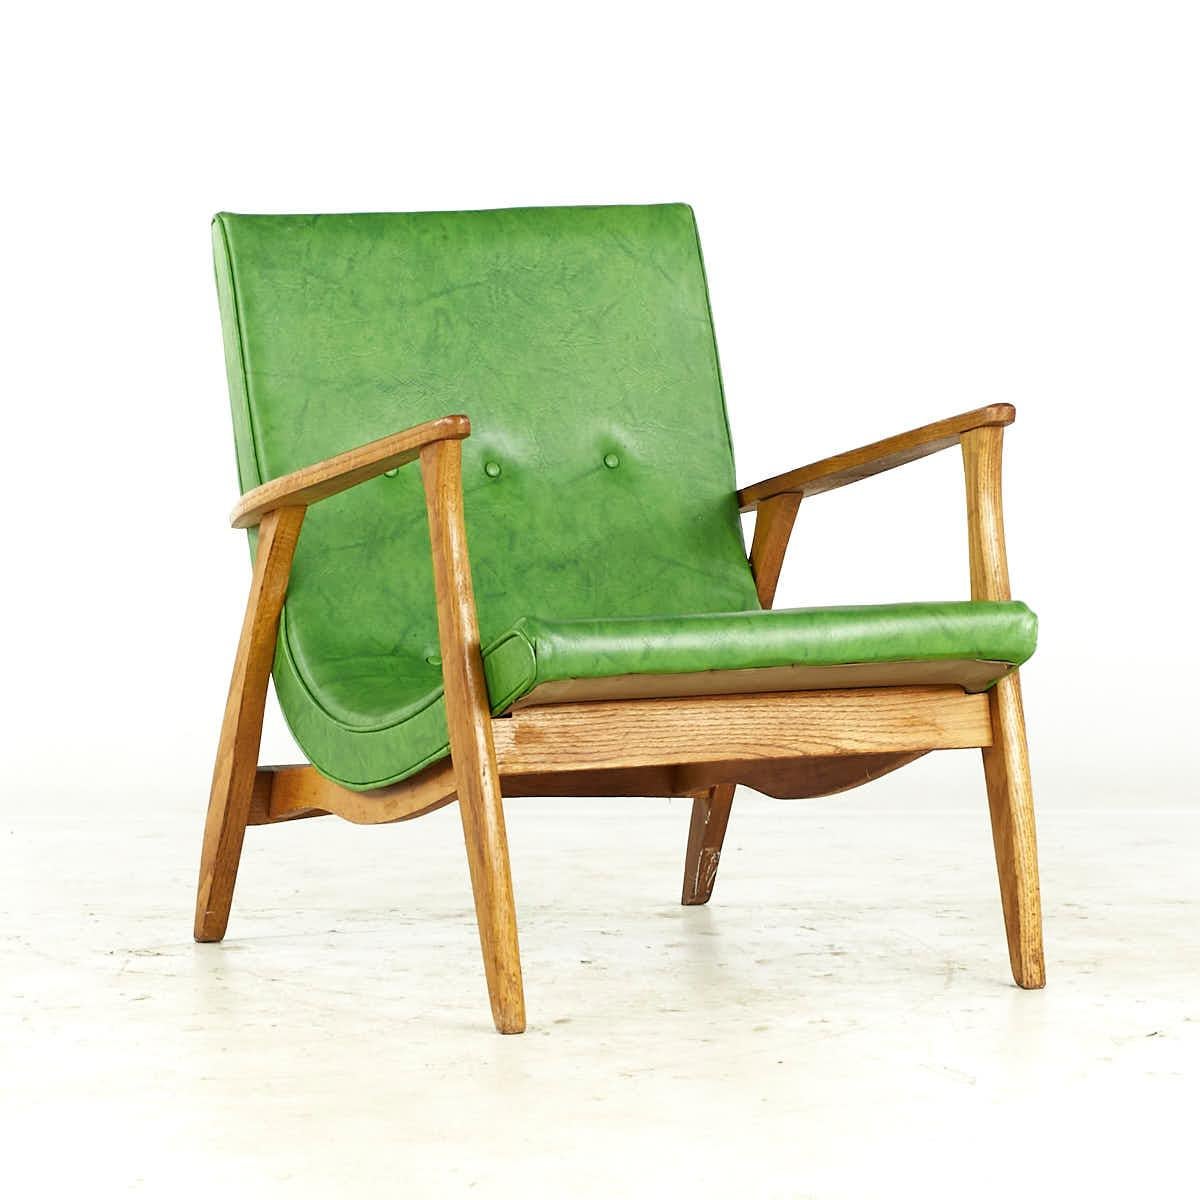 American SOLD 08/07/23 Milo Baughman Mid Century Green Scoop Lounge Chairs – Pair For Sale